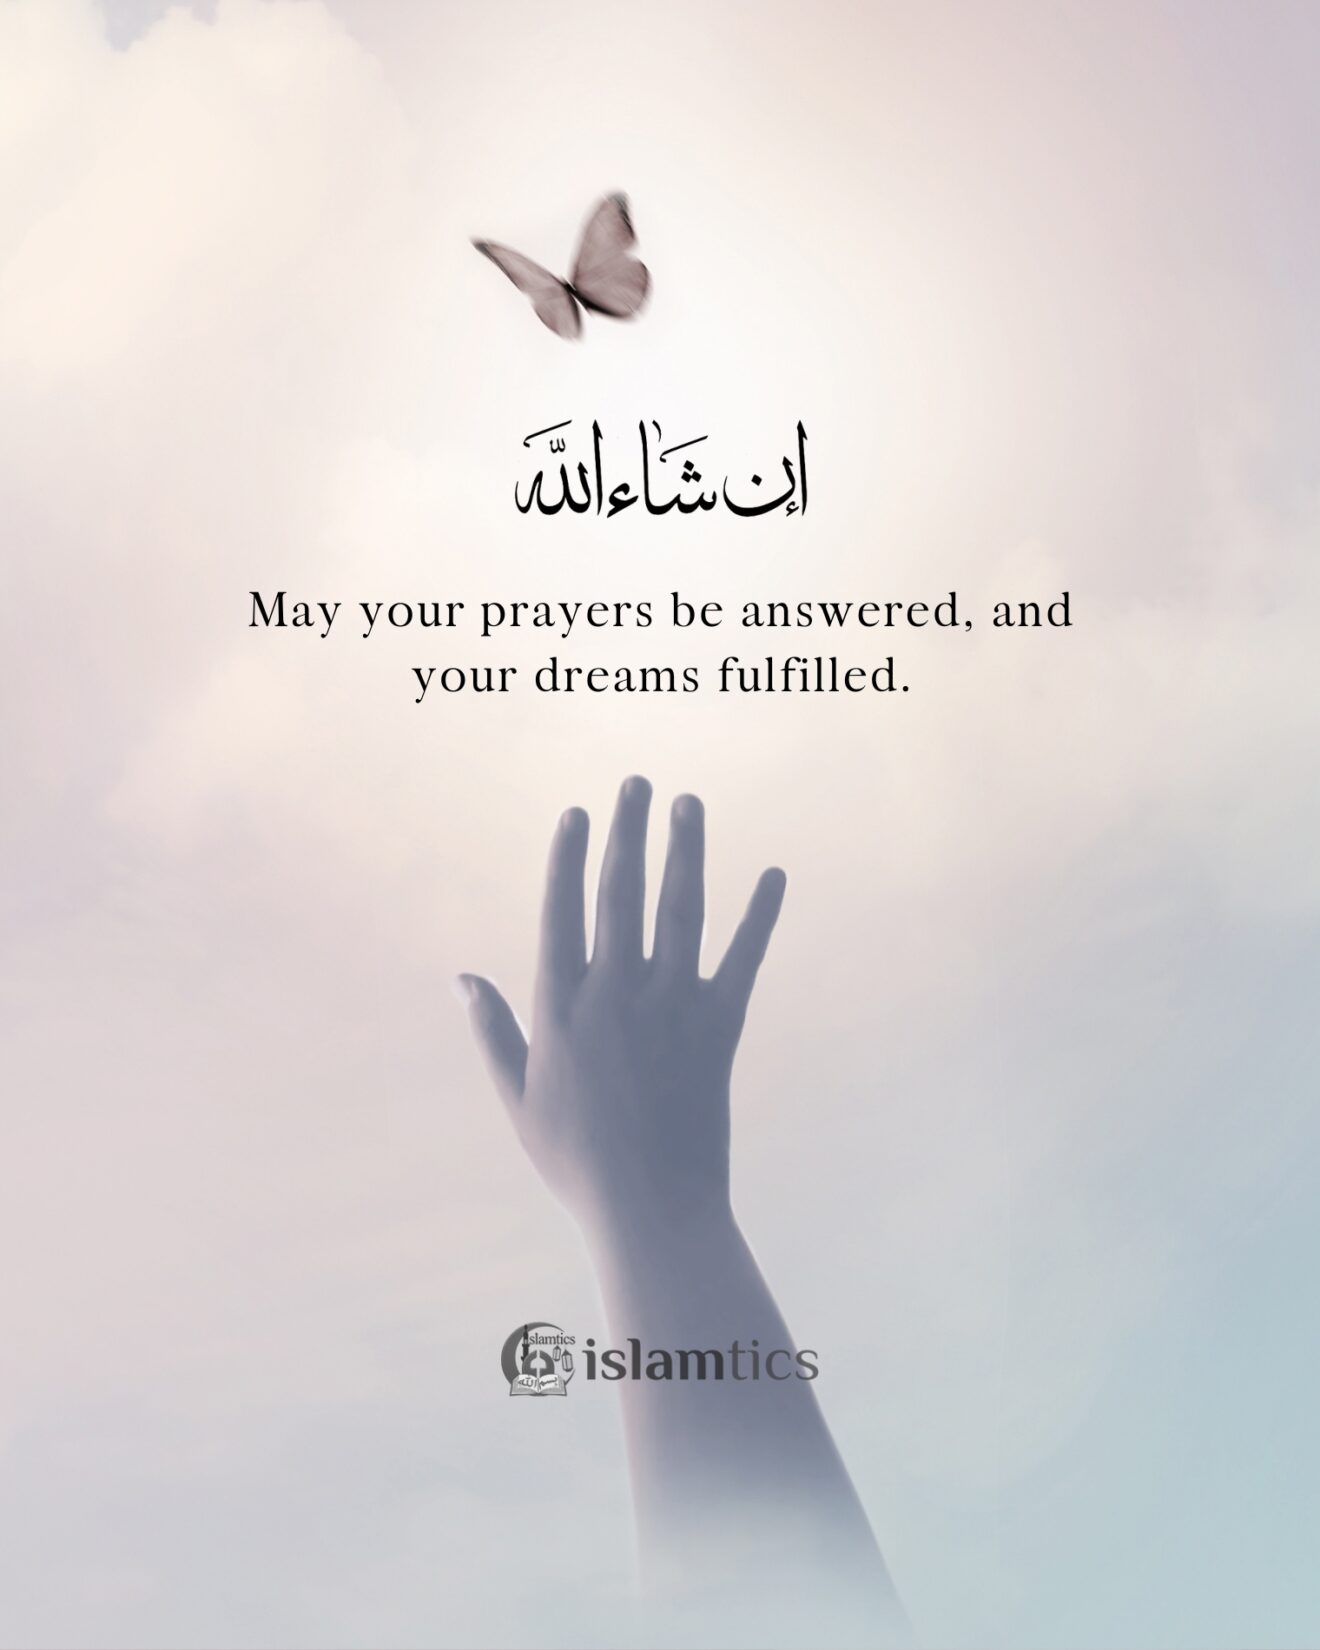  May your prayers be answered, and your dreams fulfilled.